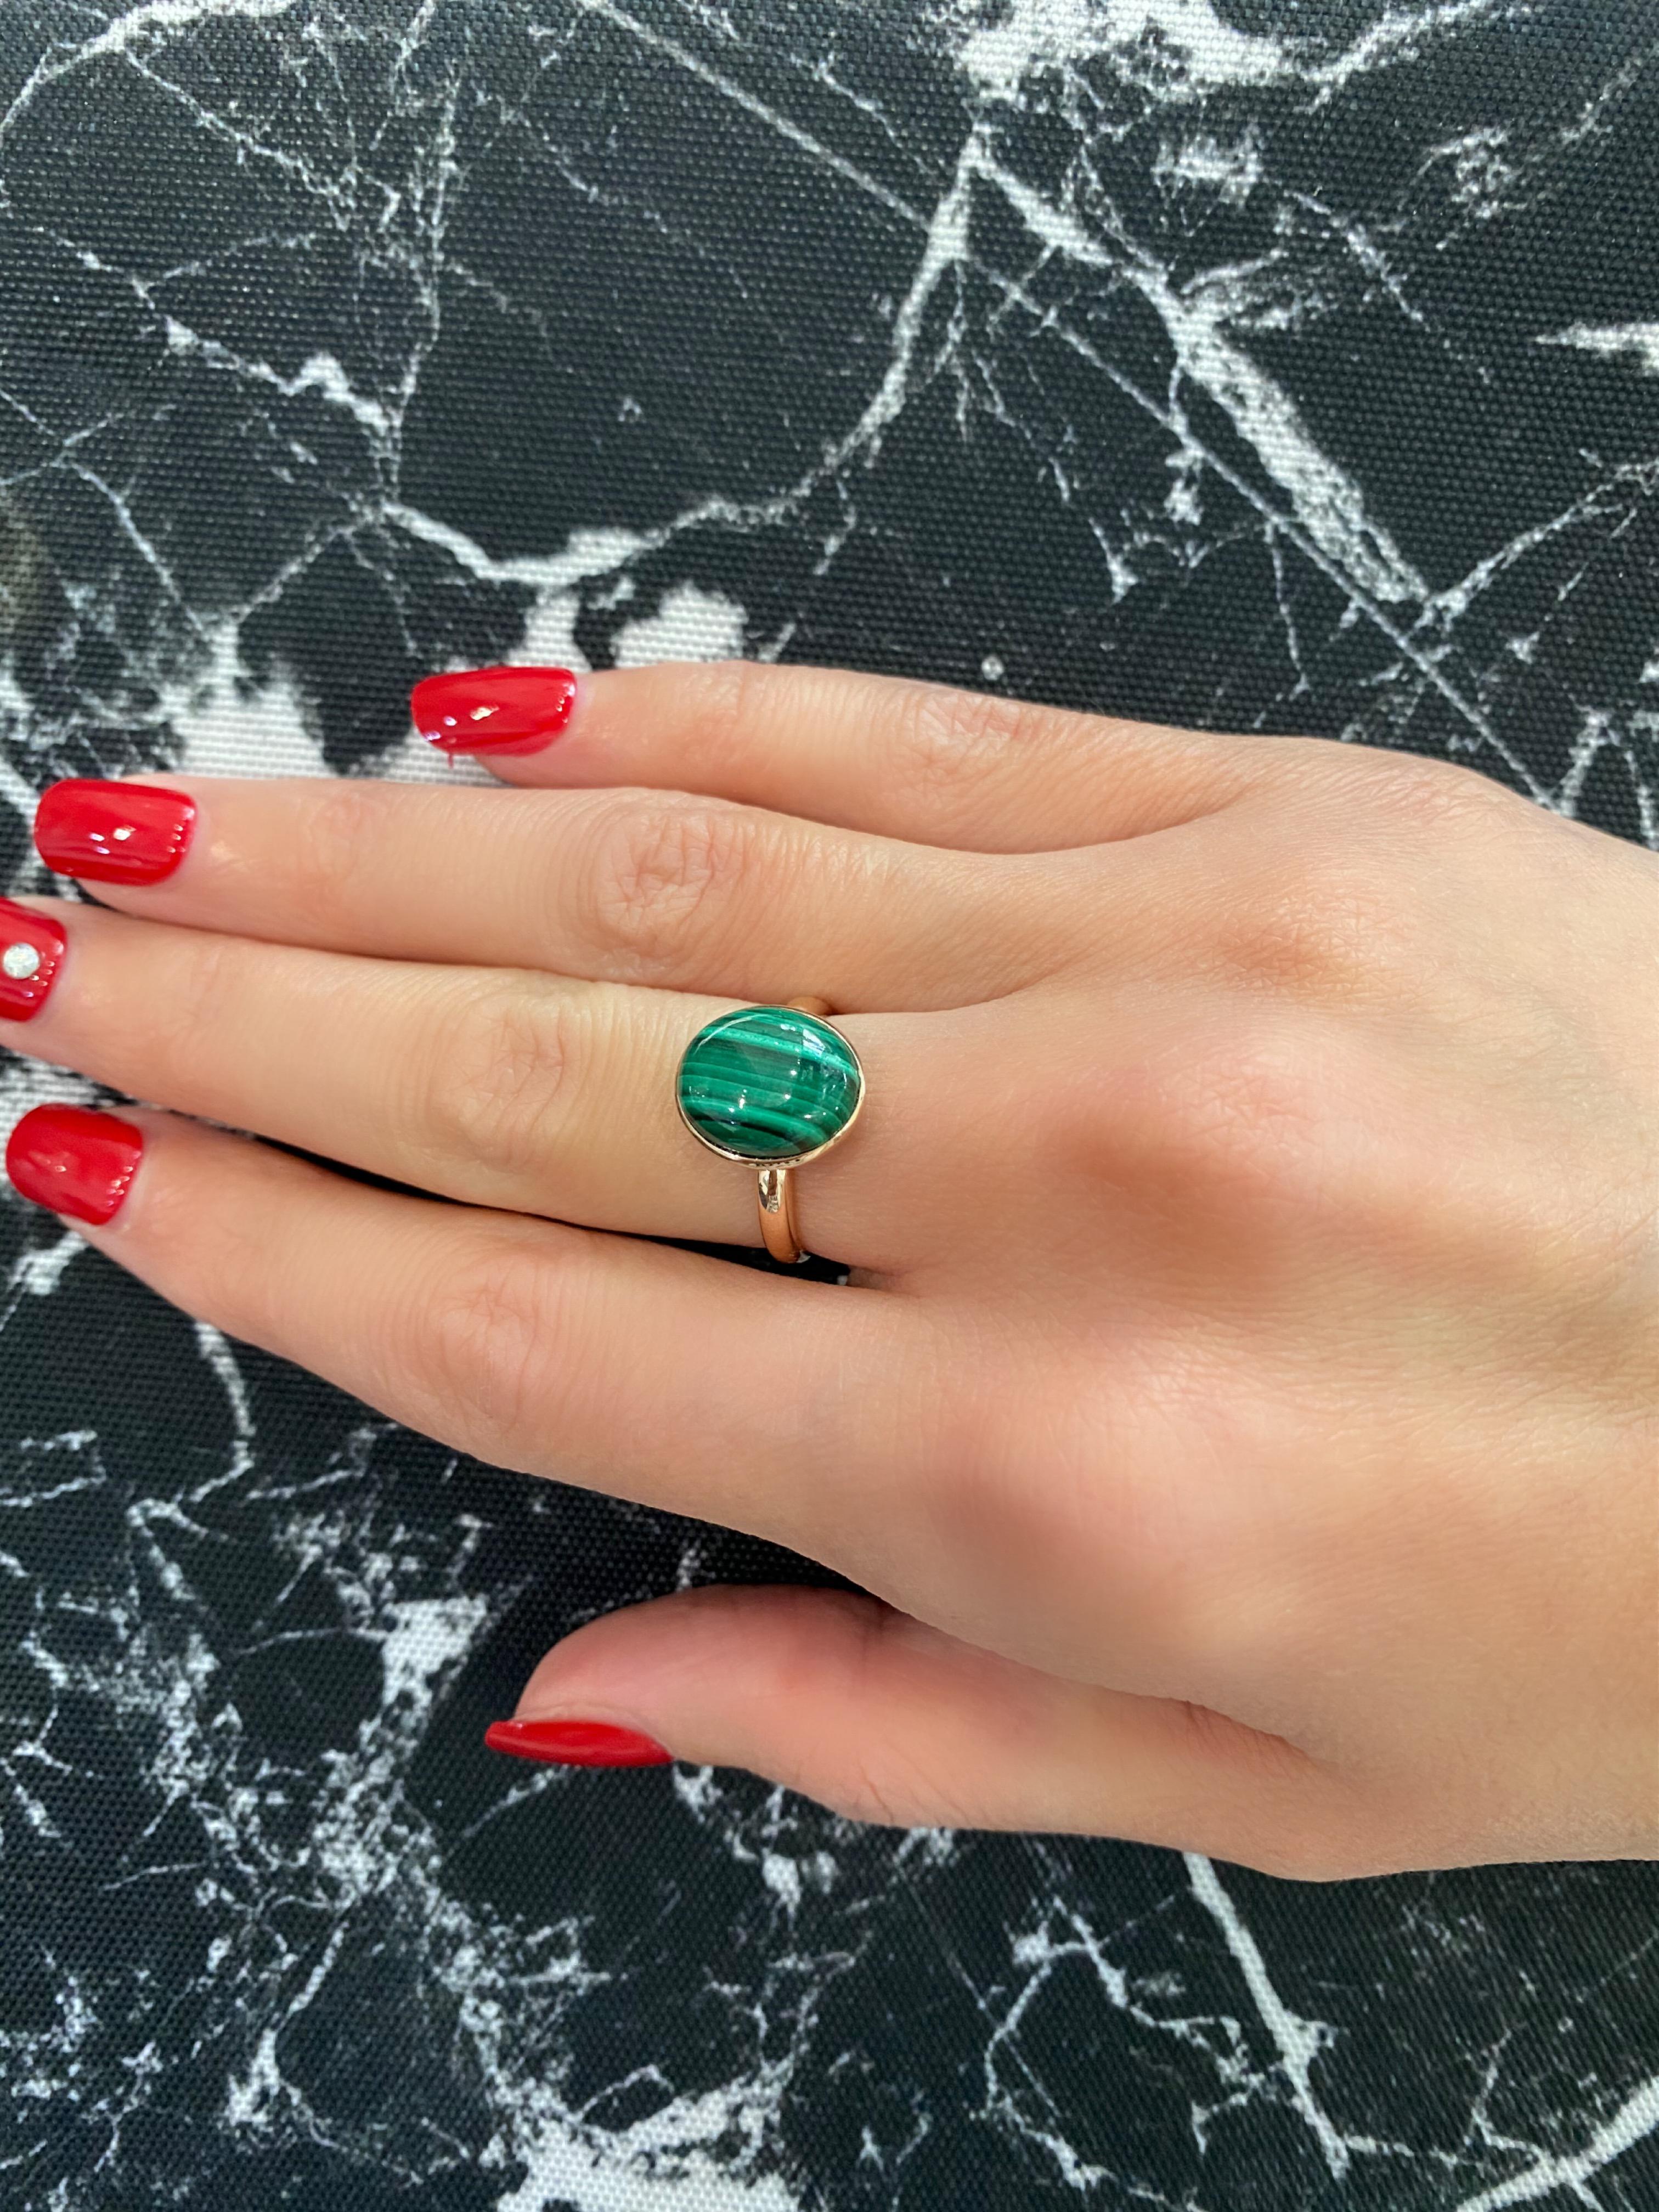 Oval Cut Green Oval Malachite Gemstone Cabochon Solitaire Fashion 14K Rose Gold Ring For Sale